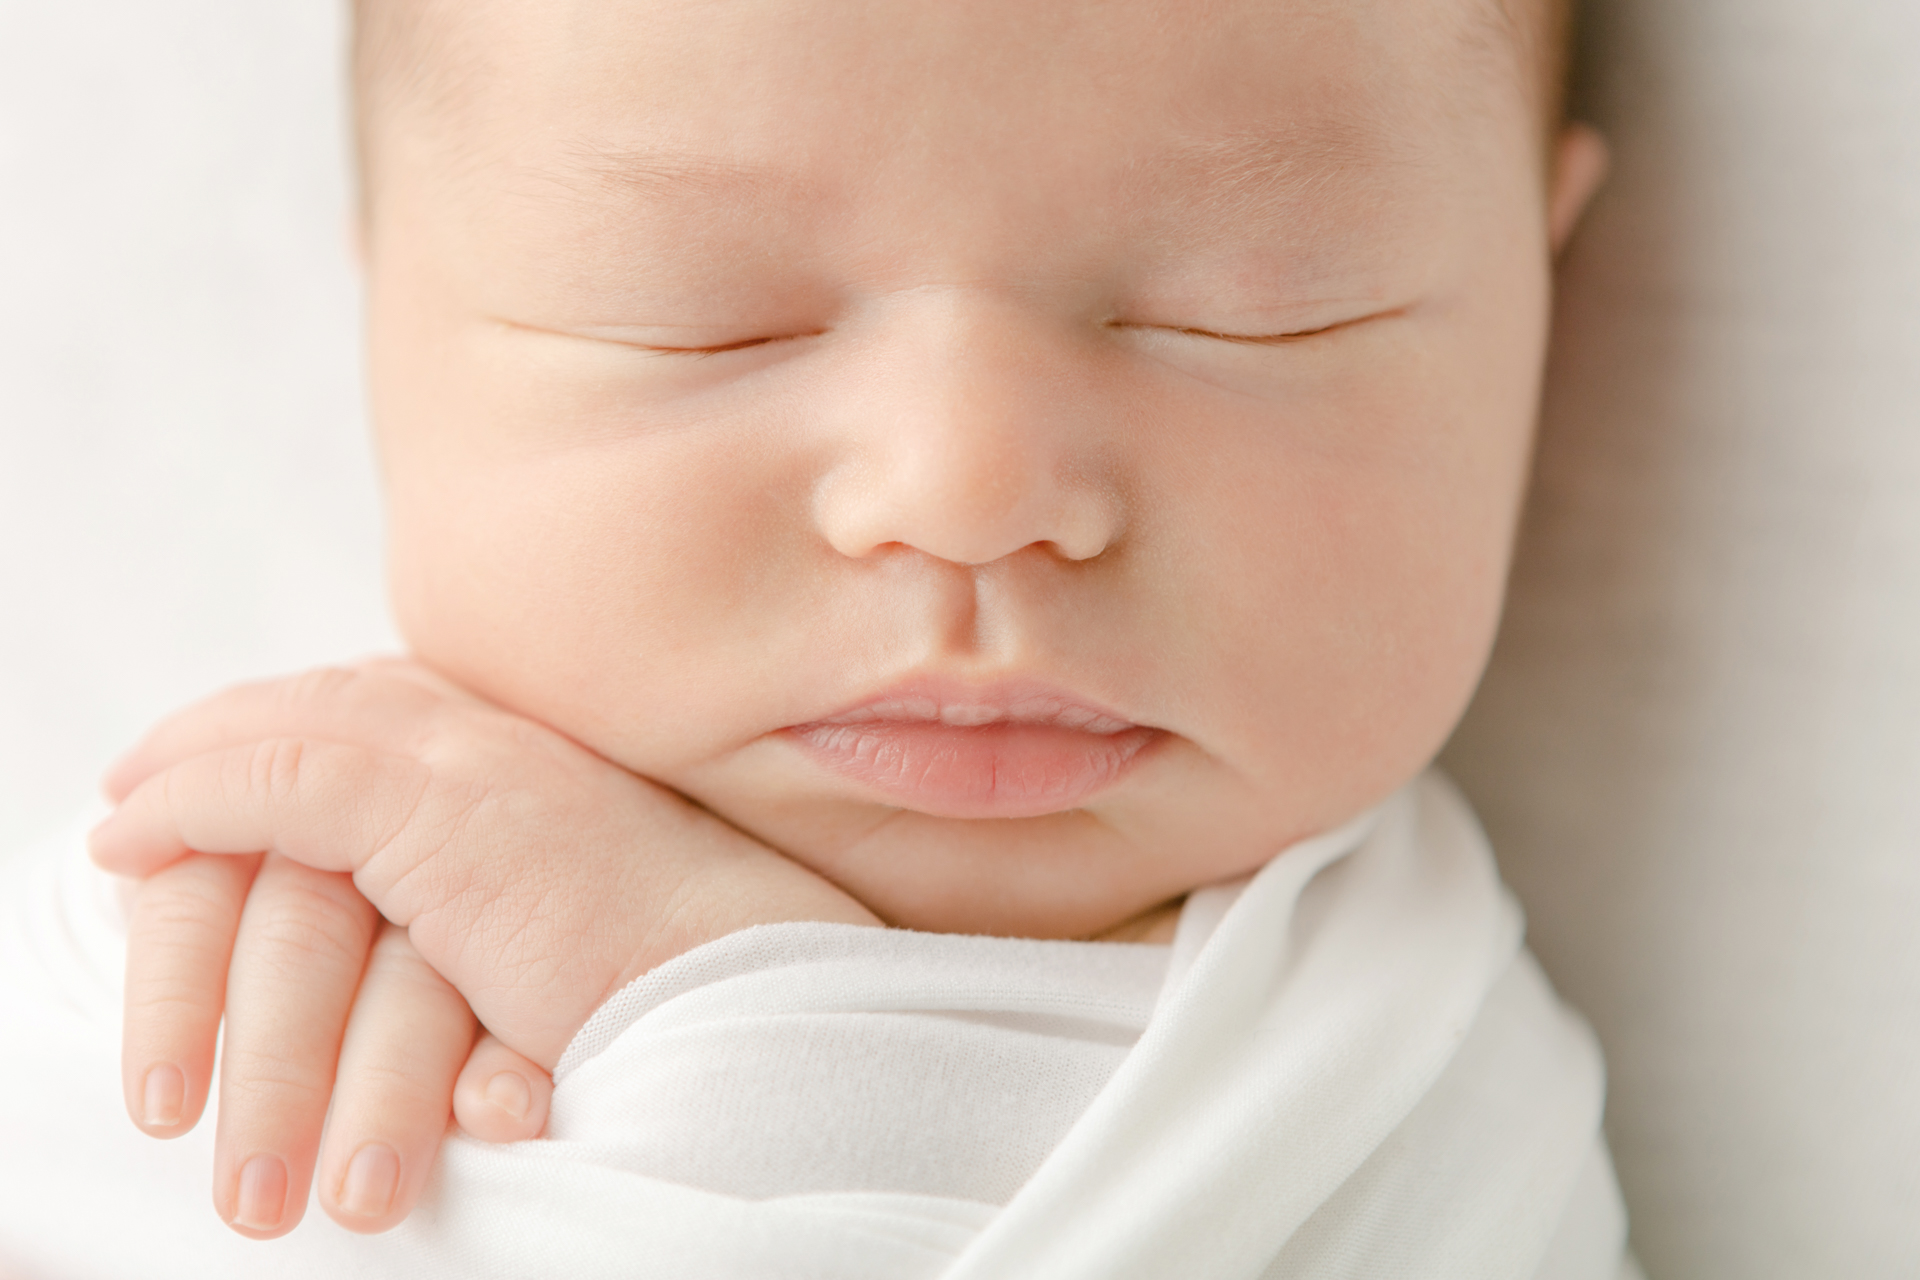 close-up photo of a sleeping newborn baby girl with her hands folded under her chin